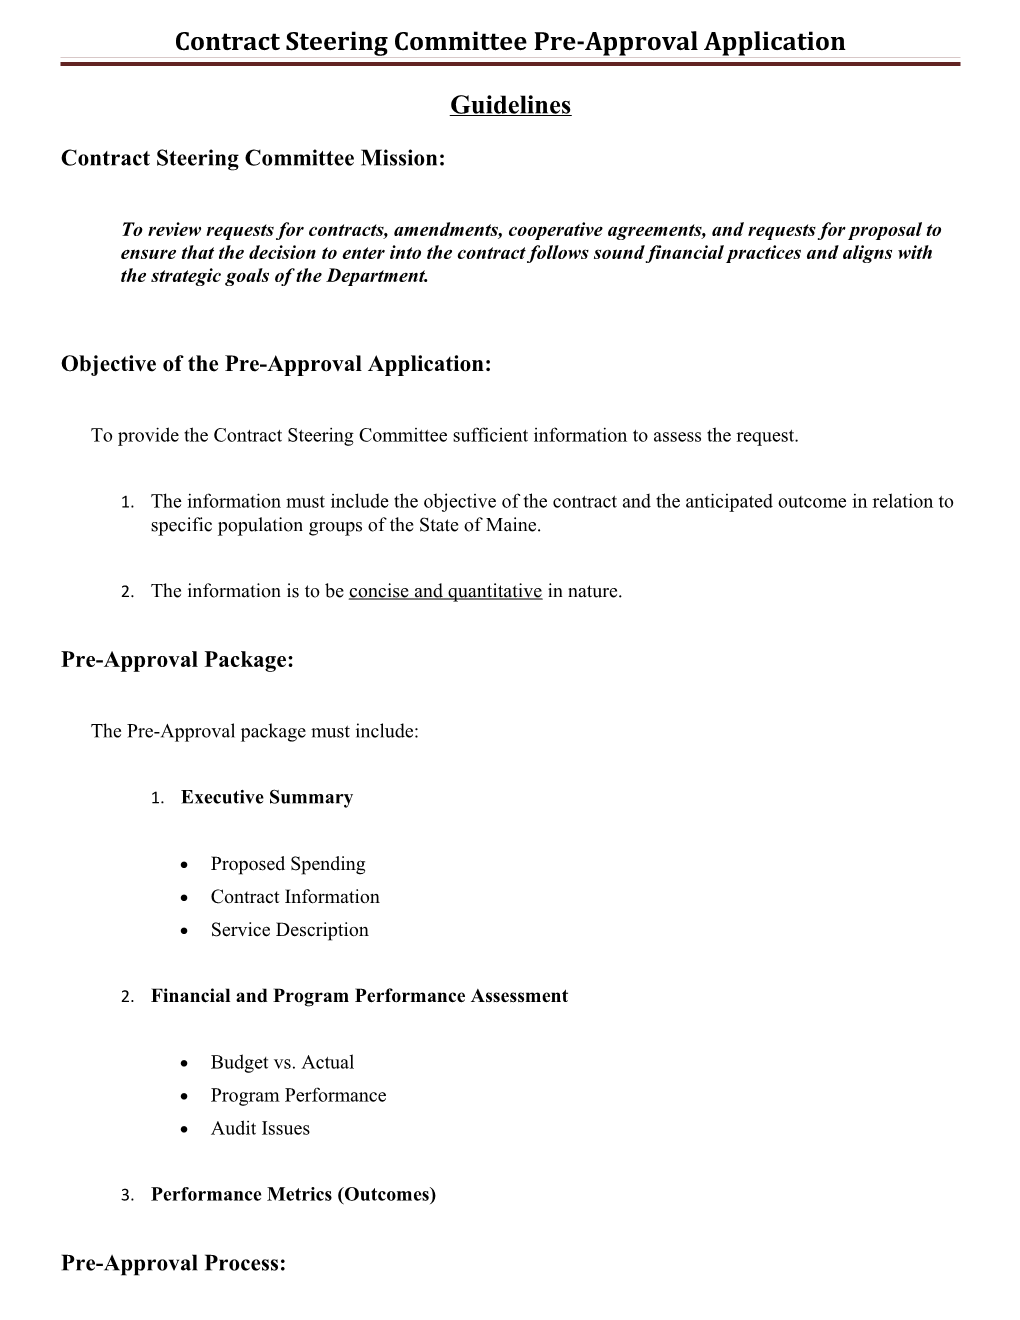 Contract Steering Committee Pre-Approval Application